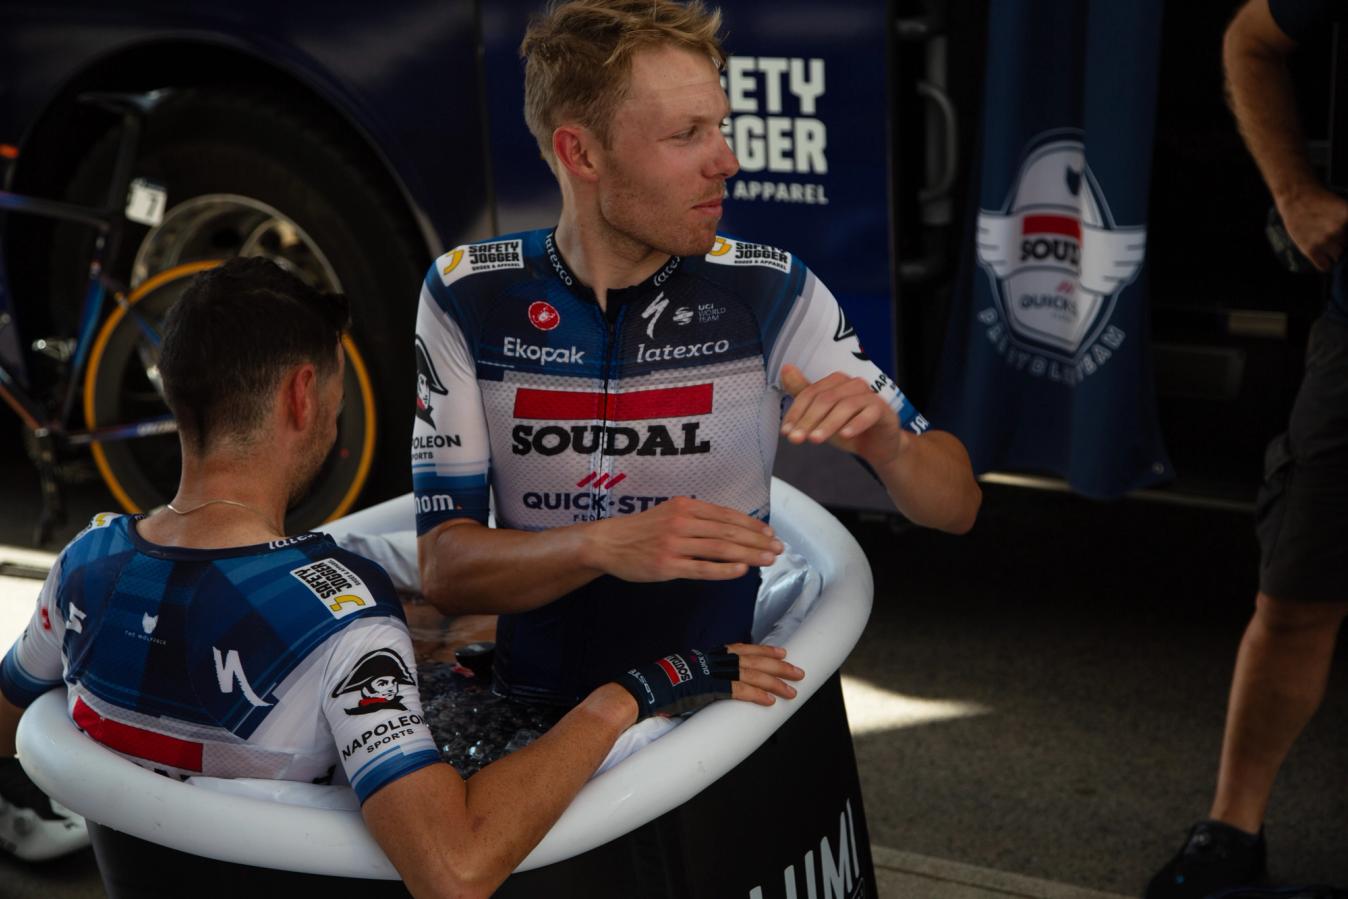 Soudal Quick-Step had ice baths prepared for its riders at the finish of stage 4 of the Vuelta a Espana